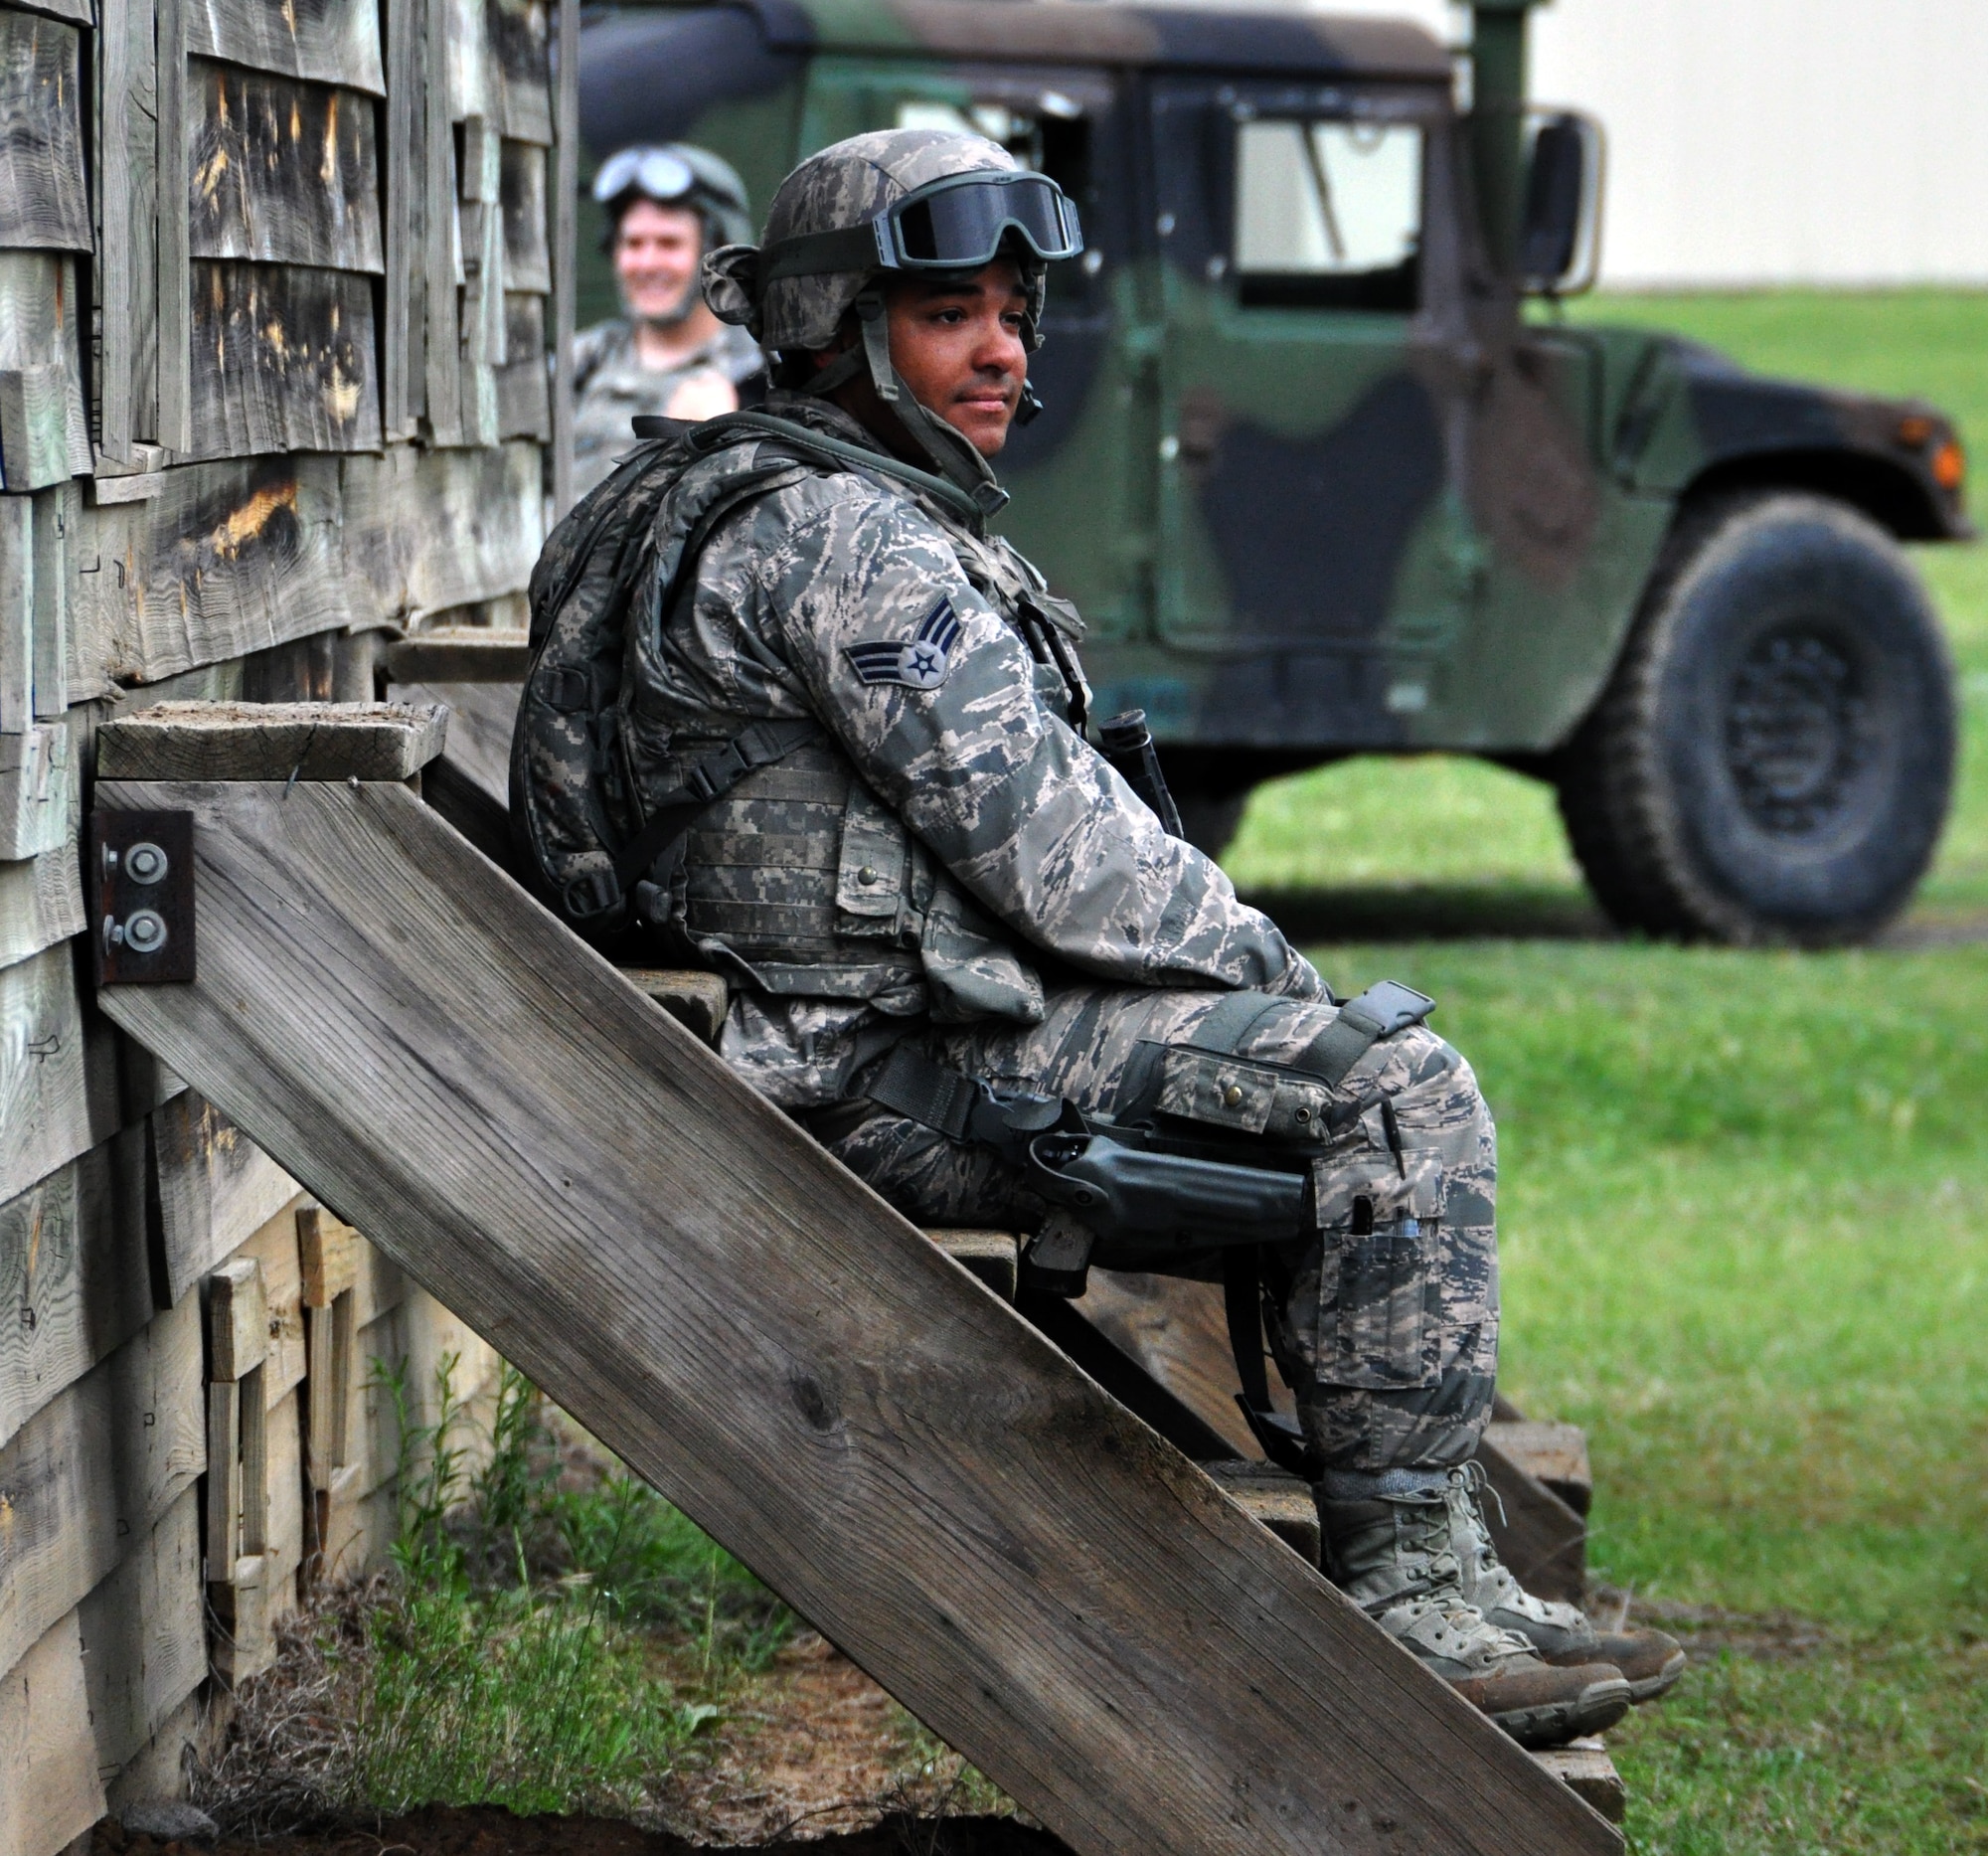 Senior Airman Anthony Davis, 931st Security Forces Squadron, takes a short break after successfully securing an area during a military operations on urban terrain (MOUT) training exercise at Camp Gruber Training Center, Okla., April 15, 2015.  More than 80 members of the  931 SFS and 931st Civil Engineer Squadron participated in ten days of combat skills training at Camp Gruber, which included land navigation, weapons training, tactical movements, convoy operations, base defense, room clearing procedures, foot patrols, military operations on urban terrain (MOUT) and combat lifesaving.  (U.S. Air Force photo by Capt. Zach Anderson)
